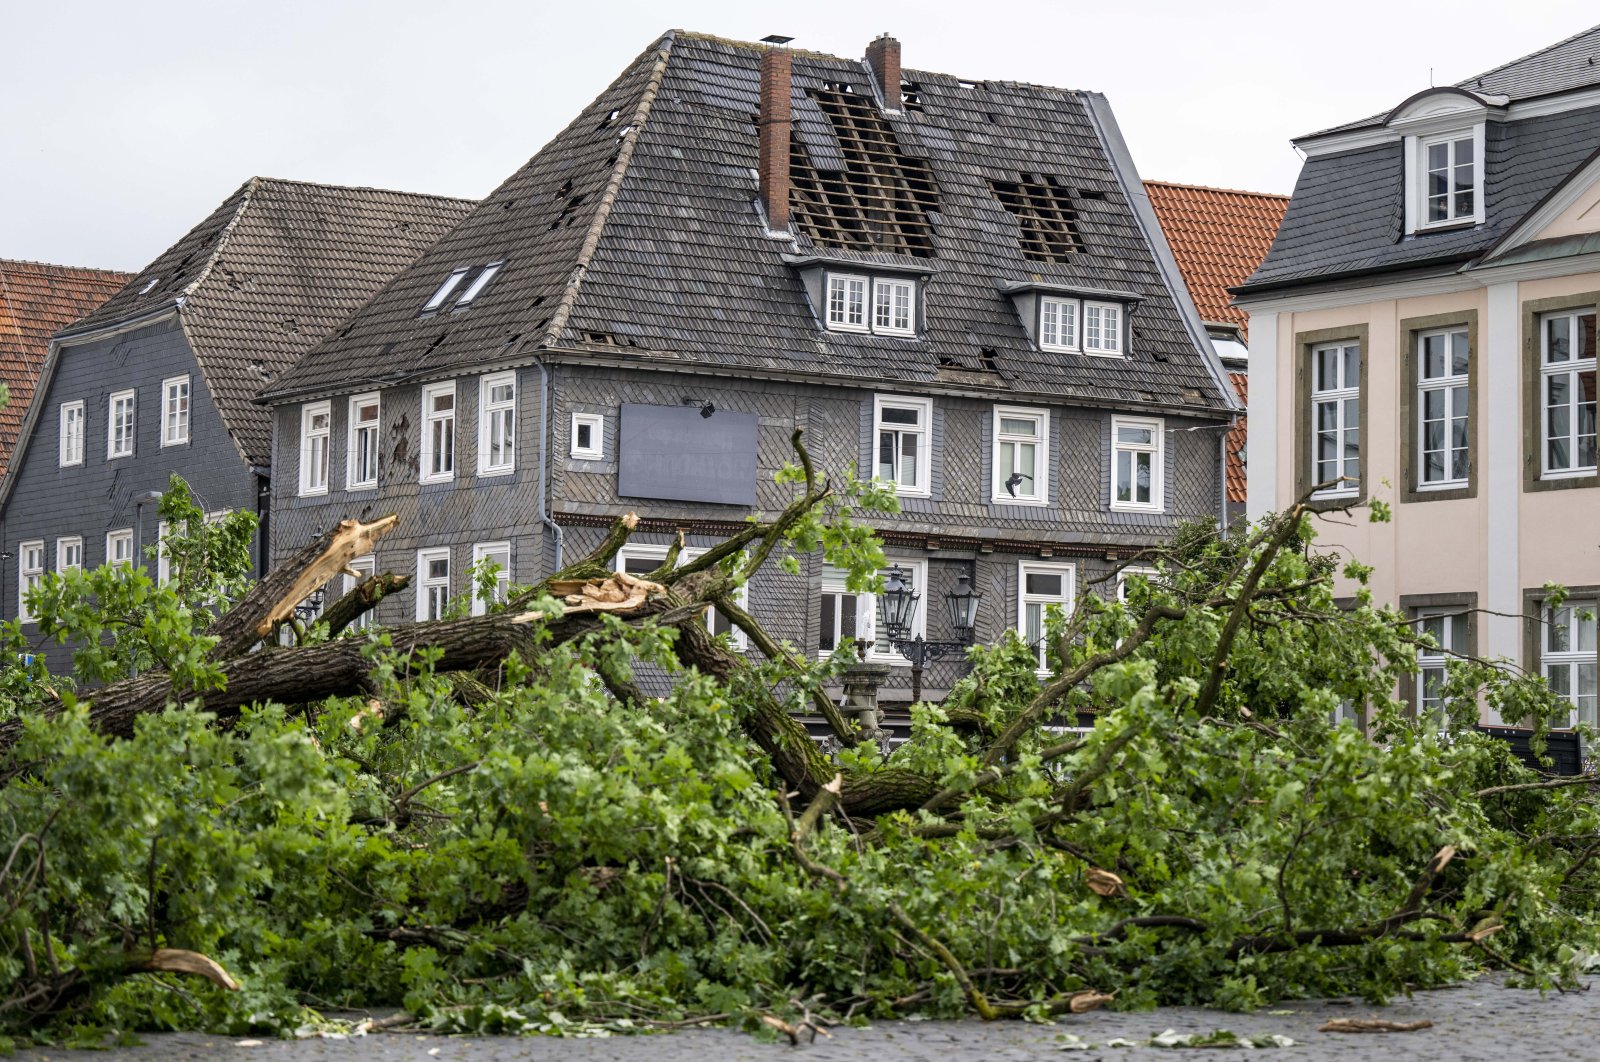 A view of the damaged roof of a residential building in Lippstadt, Germany, a day after heavy rains and storms hit the area, Germany, May 21, 2022. (dpa via AP)